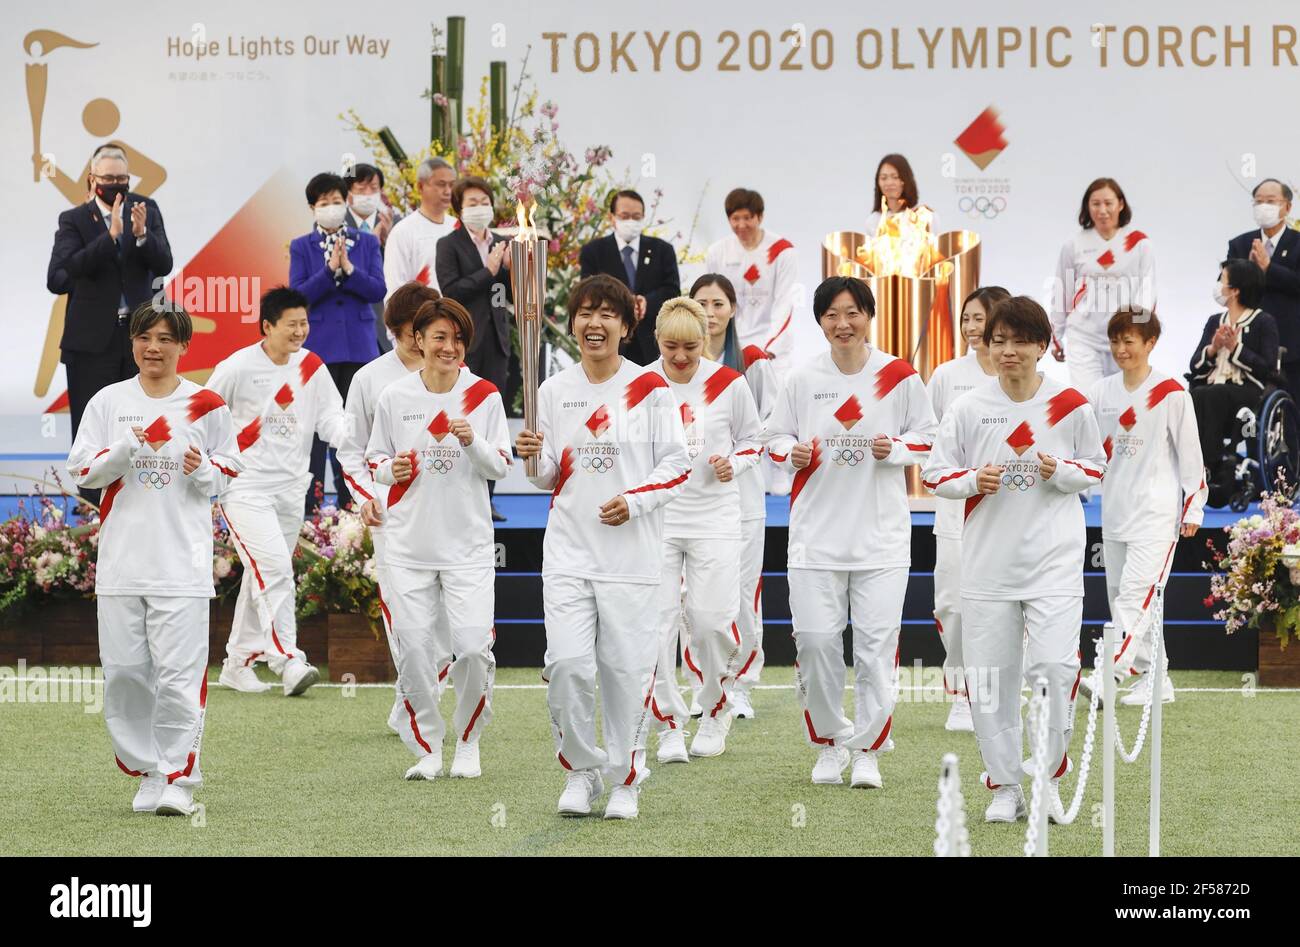 Fukishima Japan 25th Mar 21 Members Of The 11 Women S World Cup Winning Japan Soccer Team Run At The Start Of The Tokyo Olympic Torch Relay At The J Village Soccer Training Center In